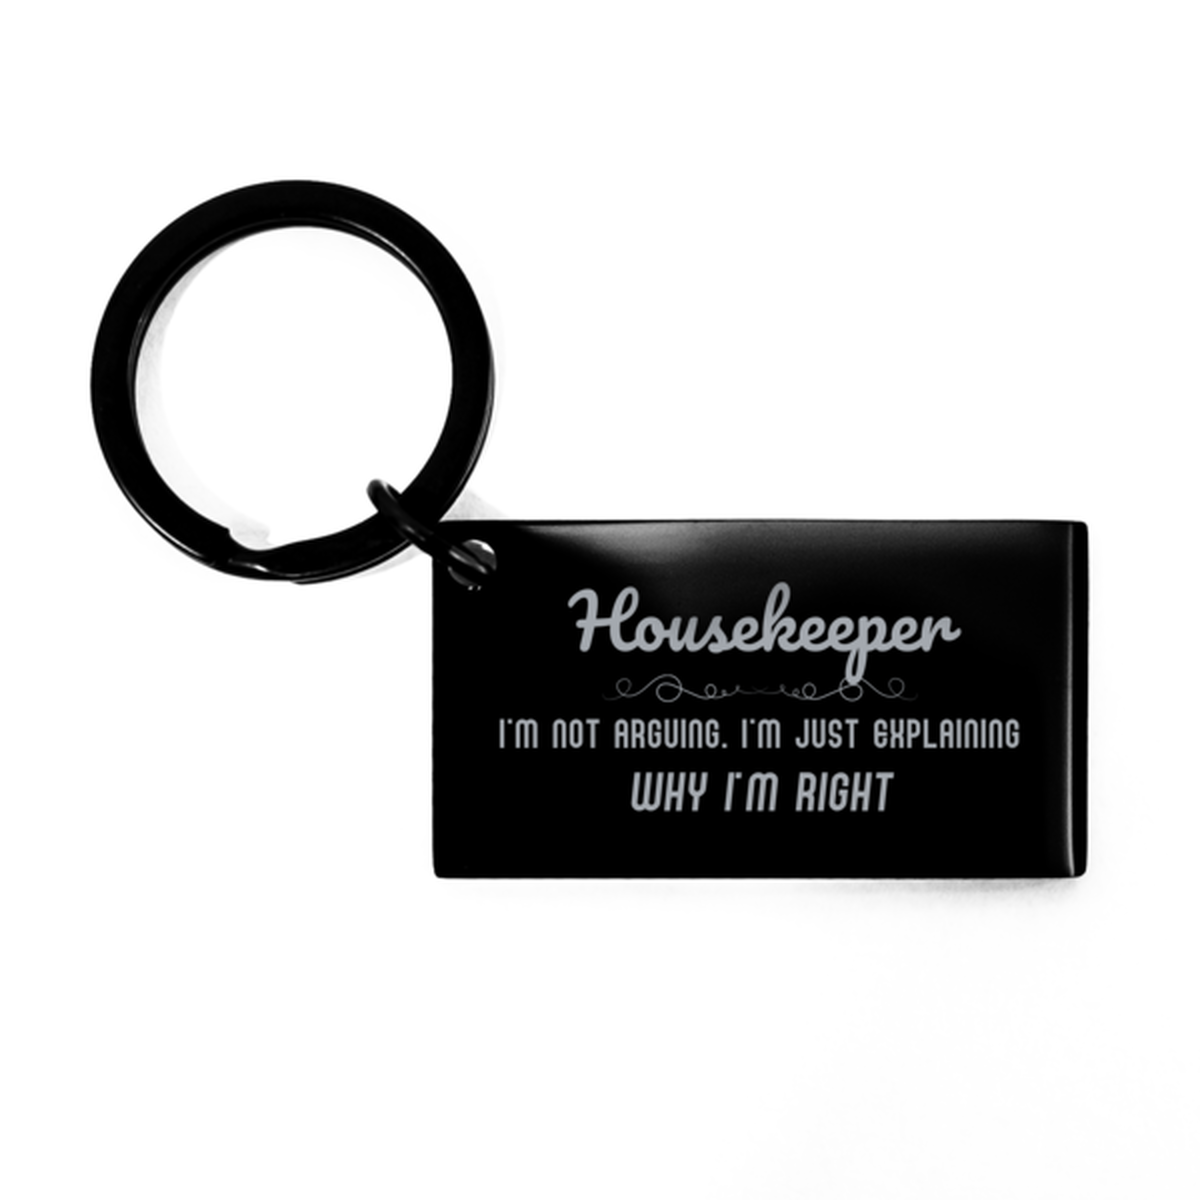 Housekeeper I'm not Arguing. I'm Just Explaining Why I'm RIGHT Keychain, Funny Saying Quote Housekeeper Gifts For Housekeeper Graduation Birthday Christmas Gifts for Men Women Coworker